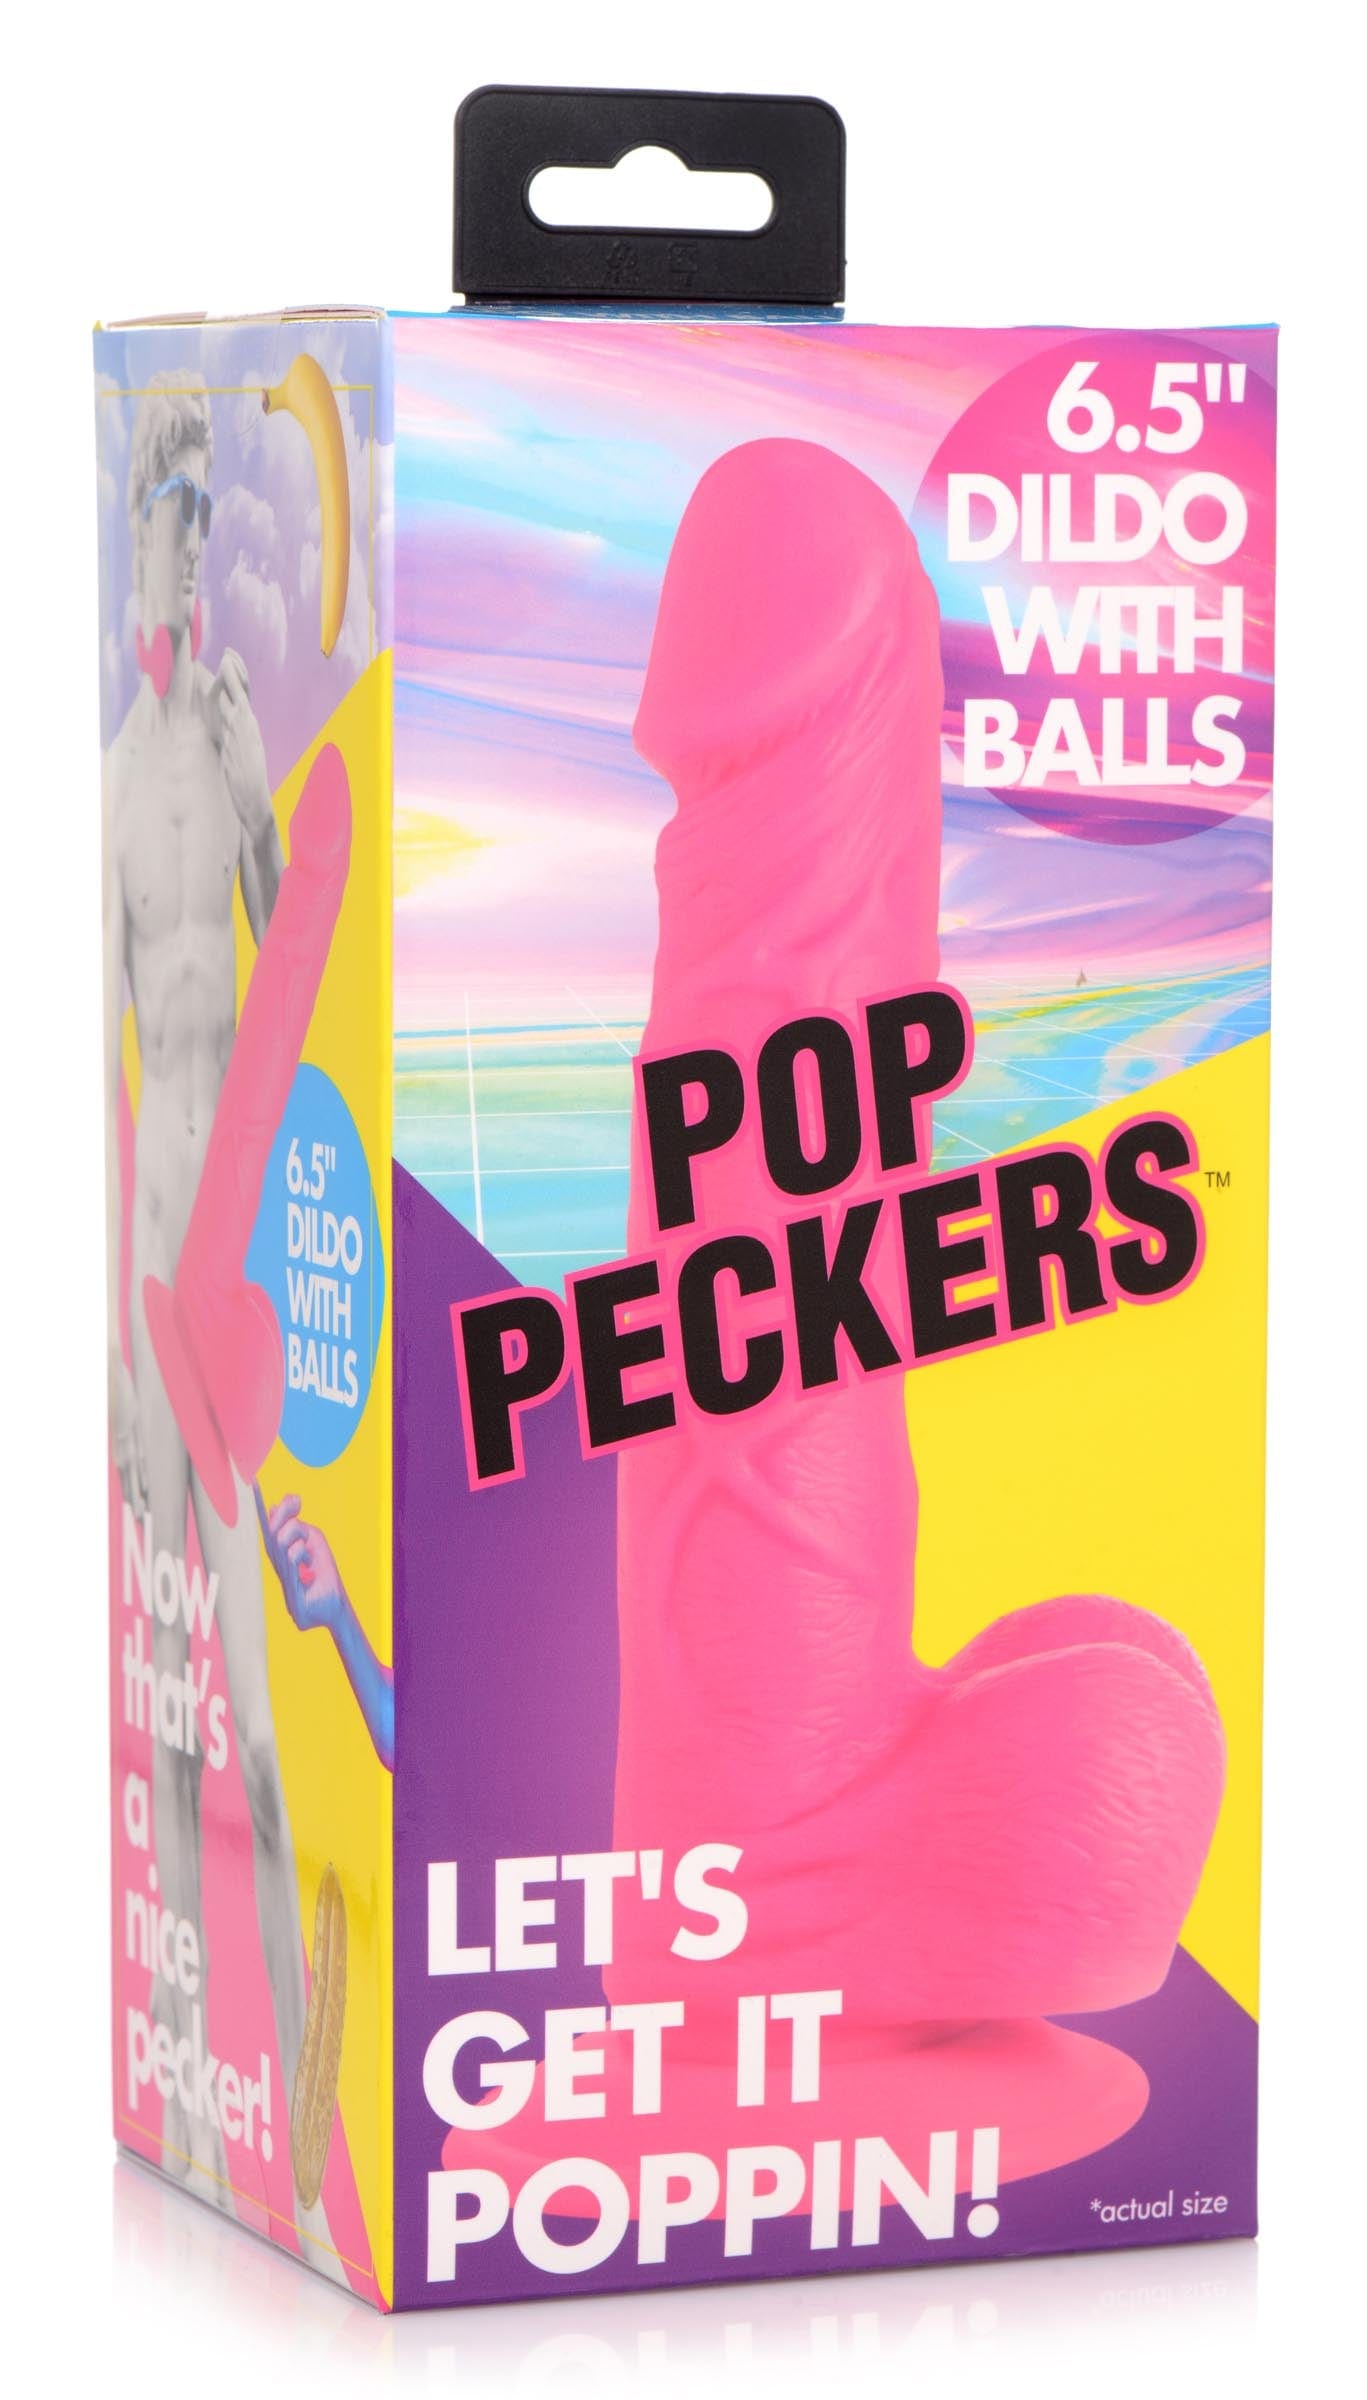 Pop Peckers Realistic Dildo Pink Pop Peckers 6.5" Dildo with Balls at the Haus of Shag